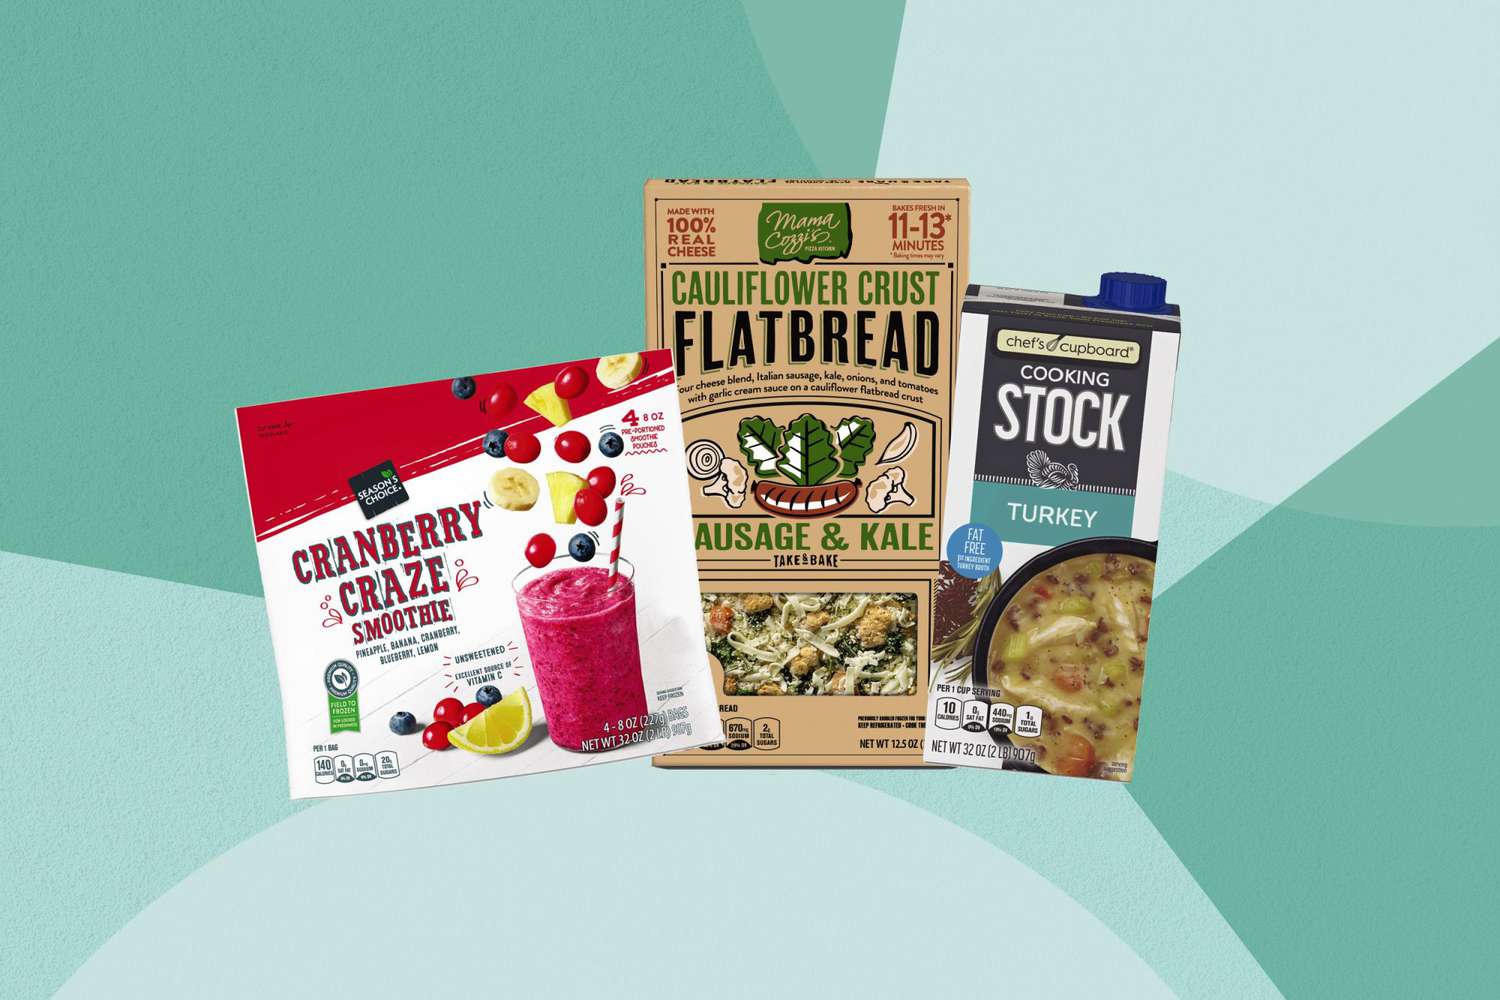 some healthy foods coming to Aldi in November 2022 including the Cranberry Craze frozen smoothie mix, the Sausage & Kale Cauliflower Crust Flatbread Pizza, and turkey Cooking Stock